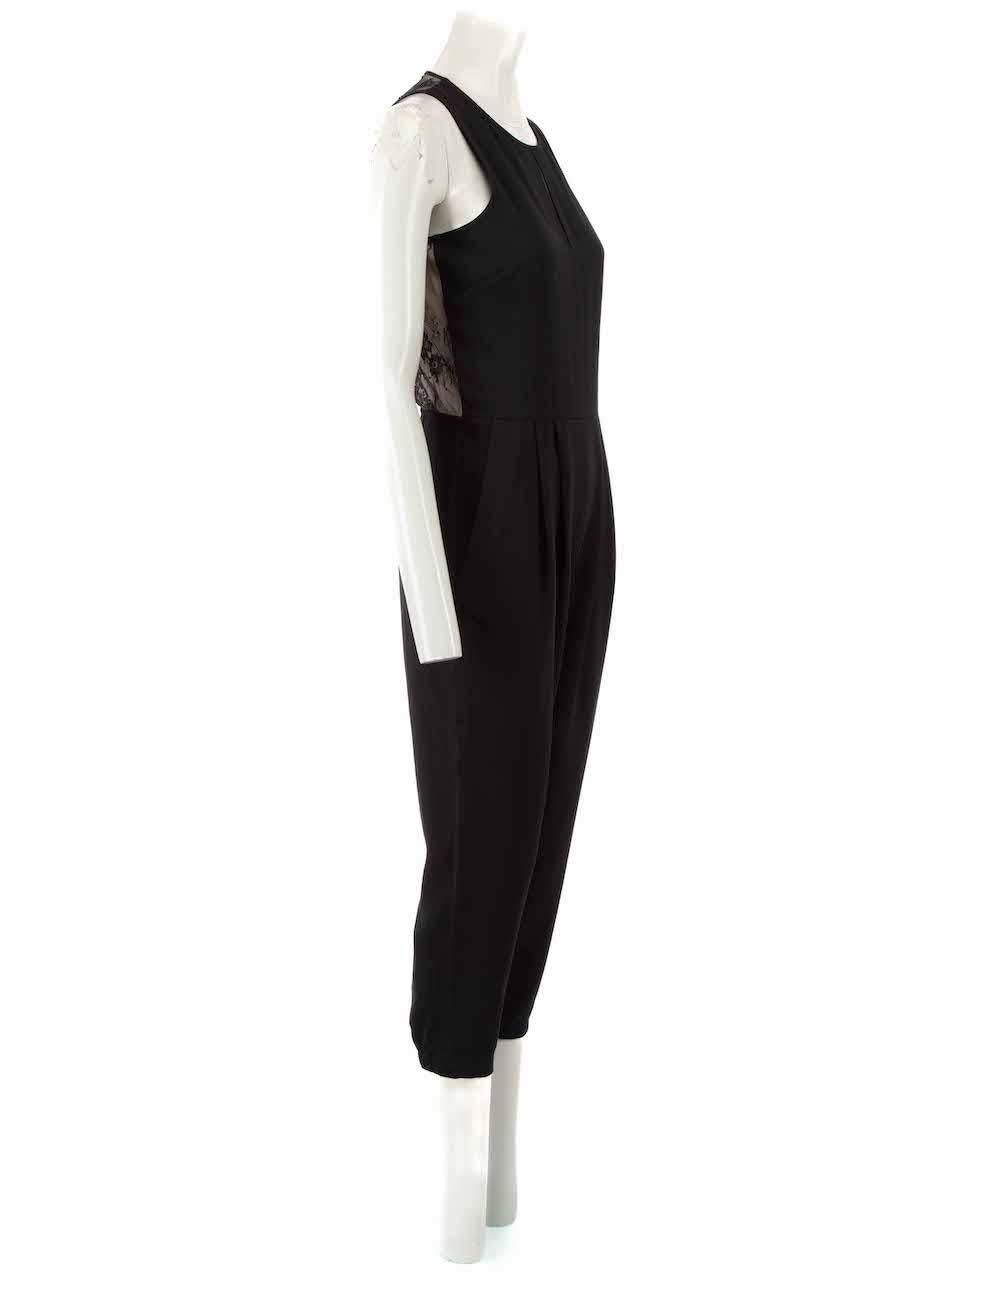 CONDITION is Never worn, with tags. No visible wear to jumpsuit is evident on this new Tibi designer resale item, however there is a warp to the mesh weave at the rear as a manufacturing technicality.
 
 Details
 Black
 Synthetic
 Jumpsuit
